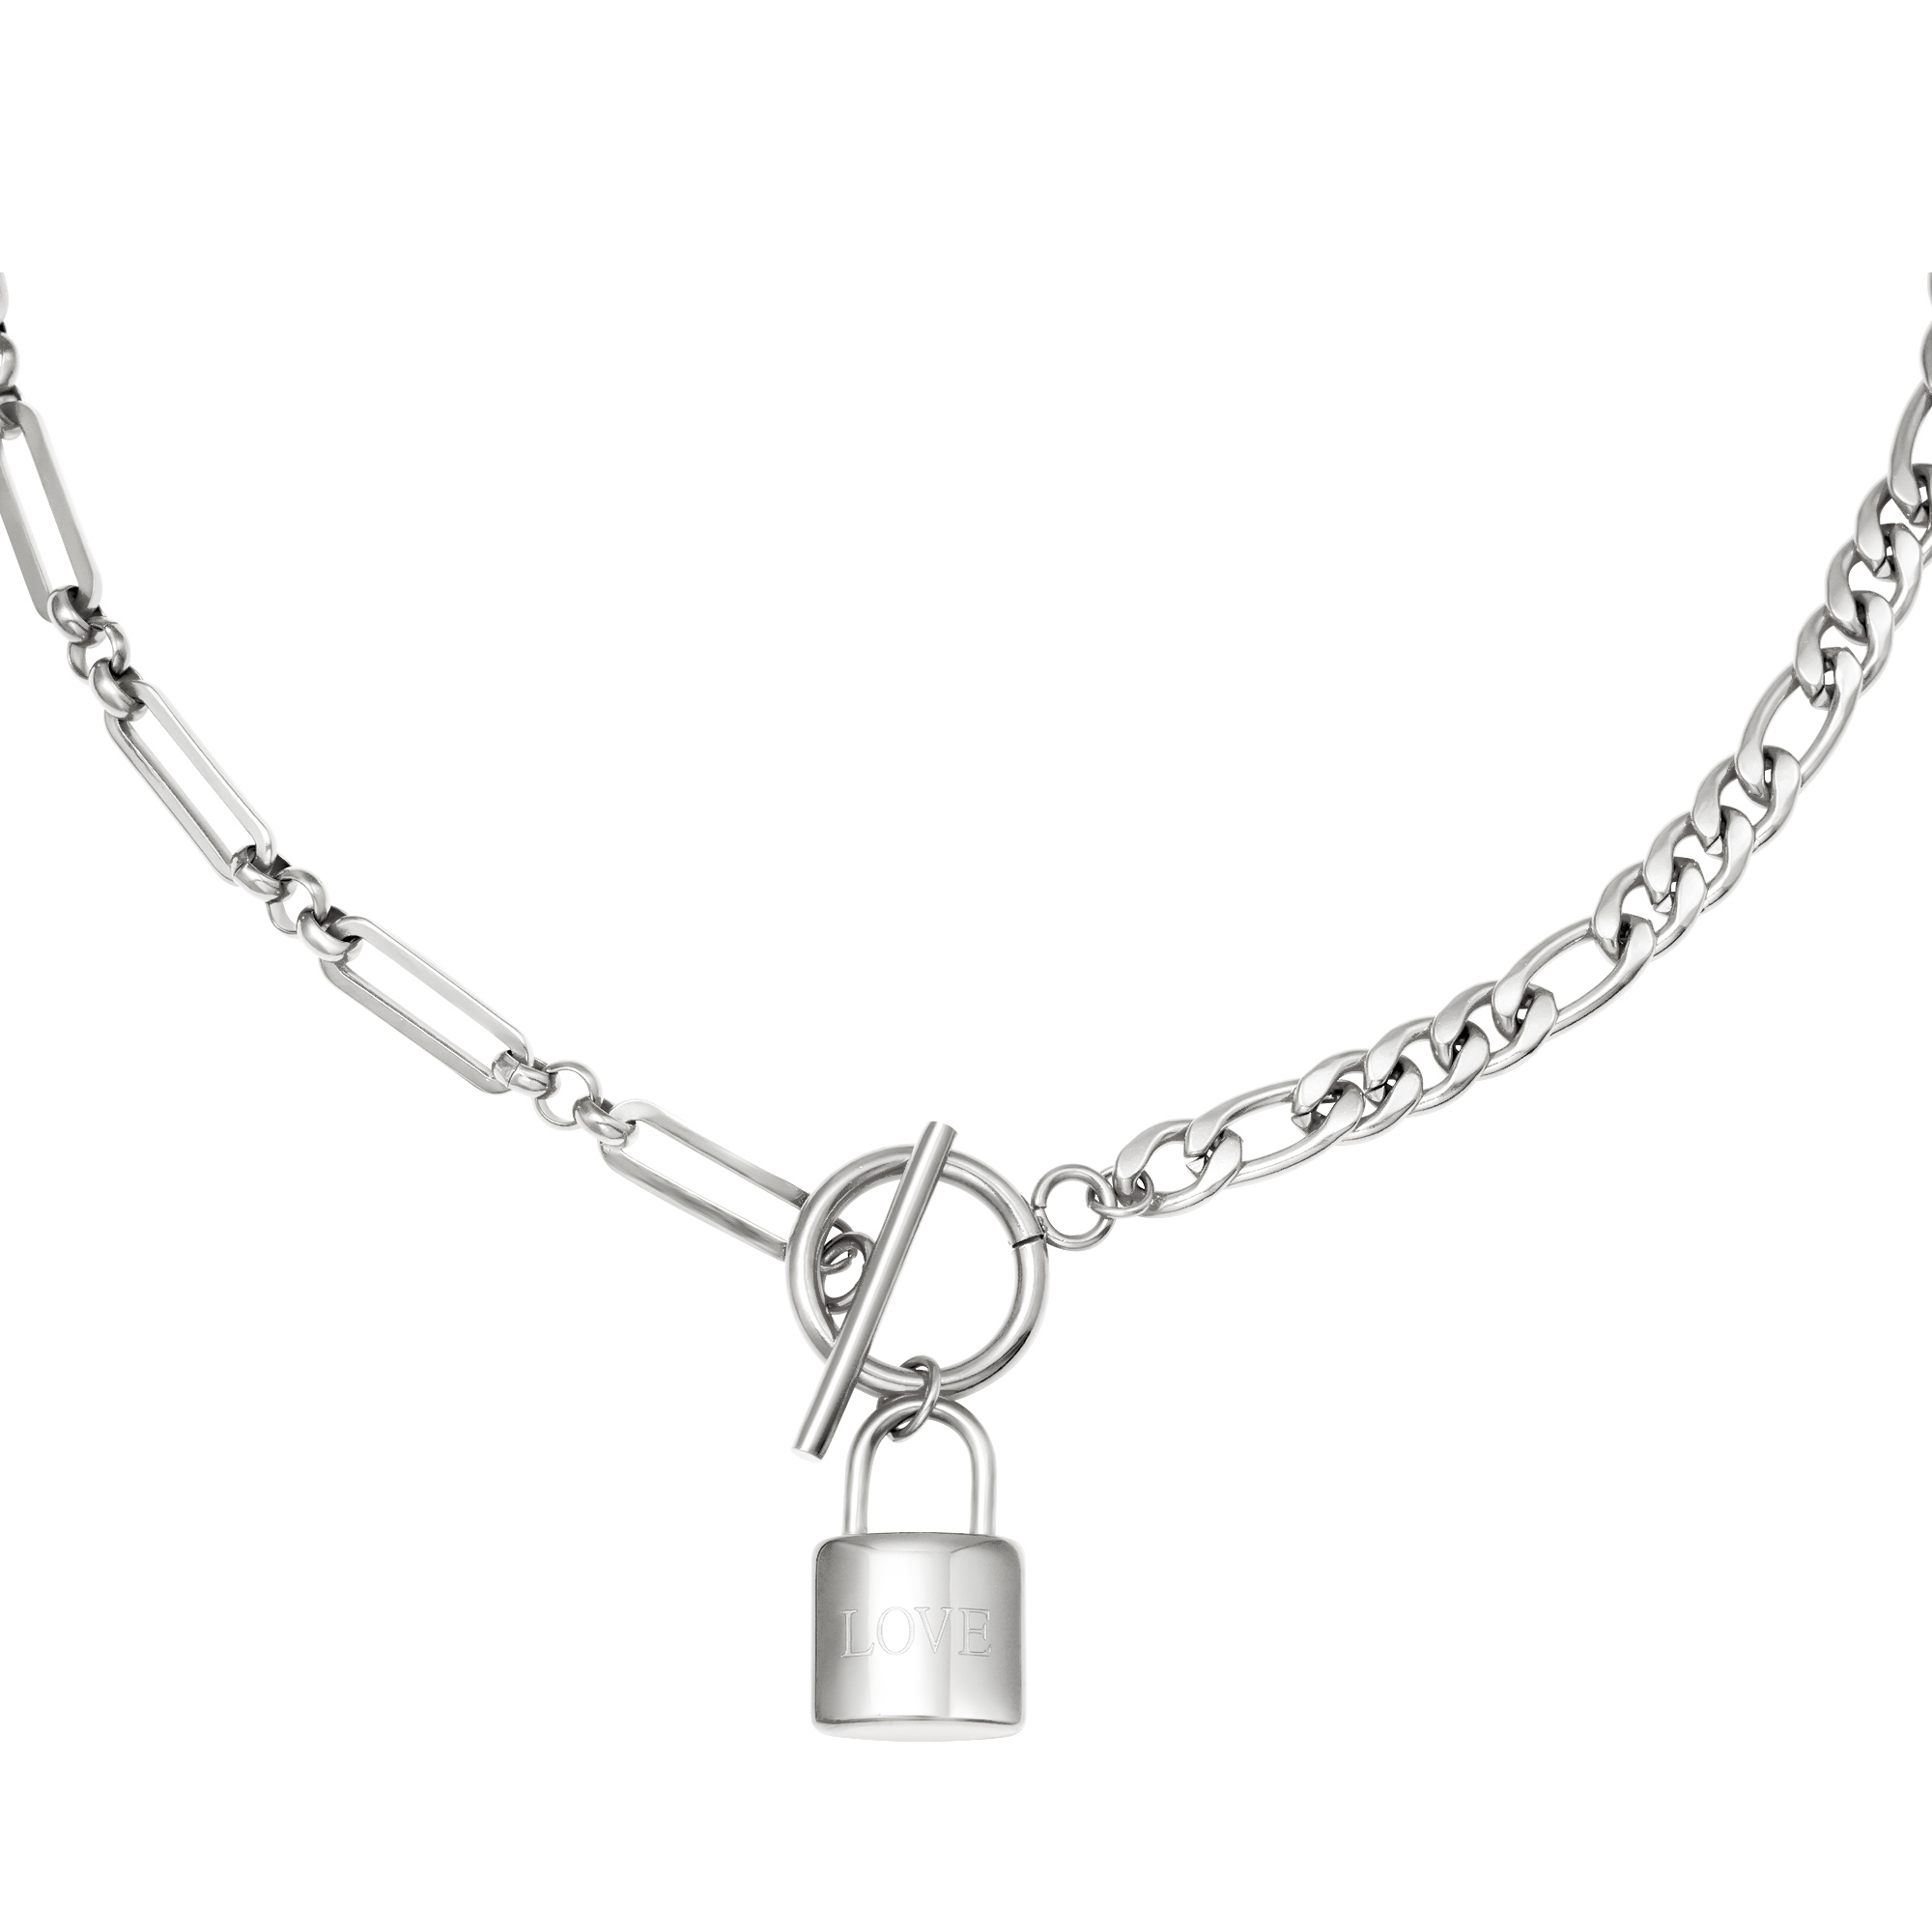 Necklace Chain & Lock Picture2